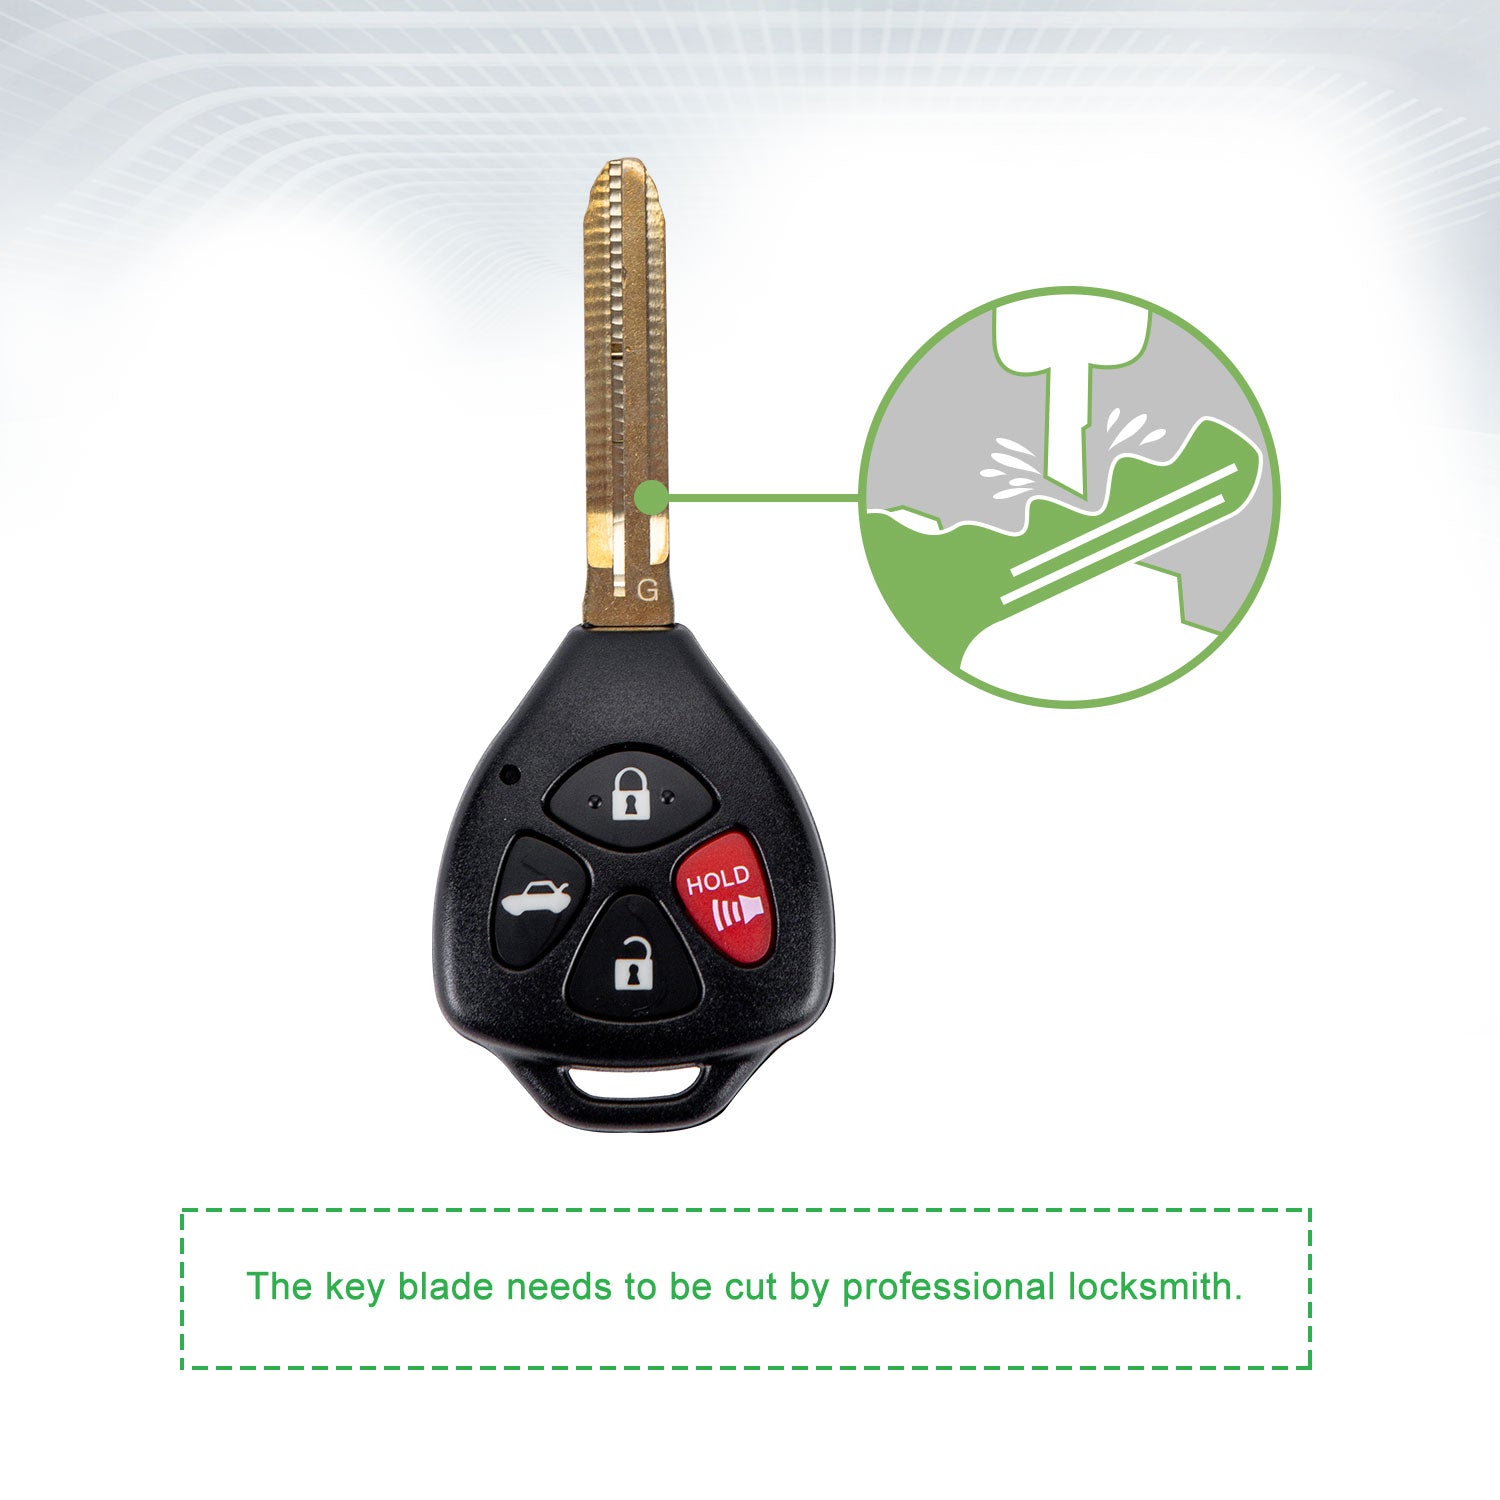 Extra-Partss Remote Car Key Fob Replacement for Toyota GQ4-29T G Chip fits 2010 2011 2012 2013 Corolla